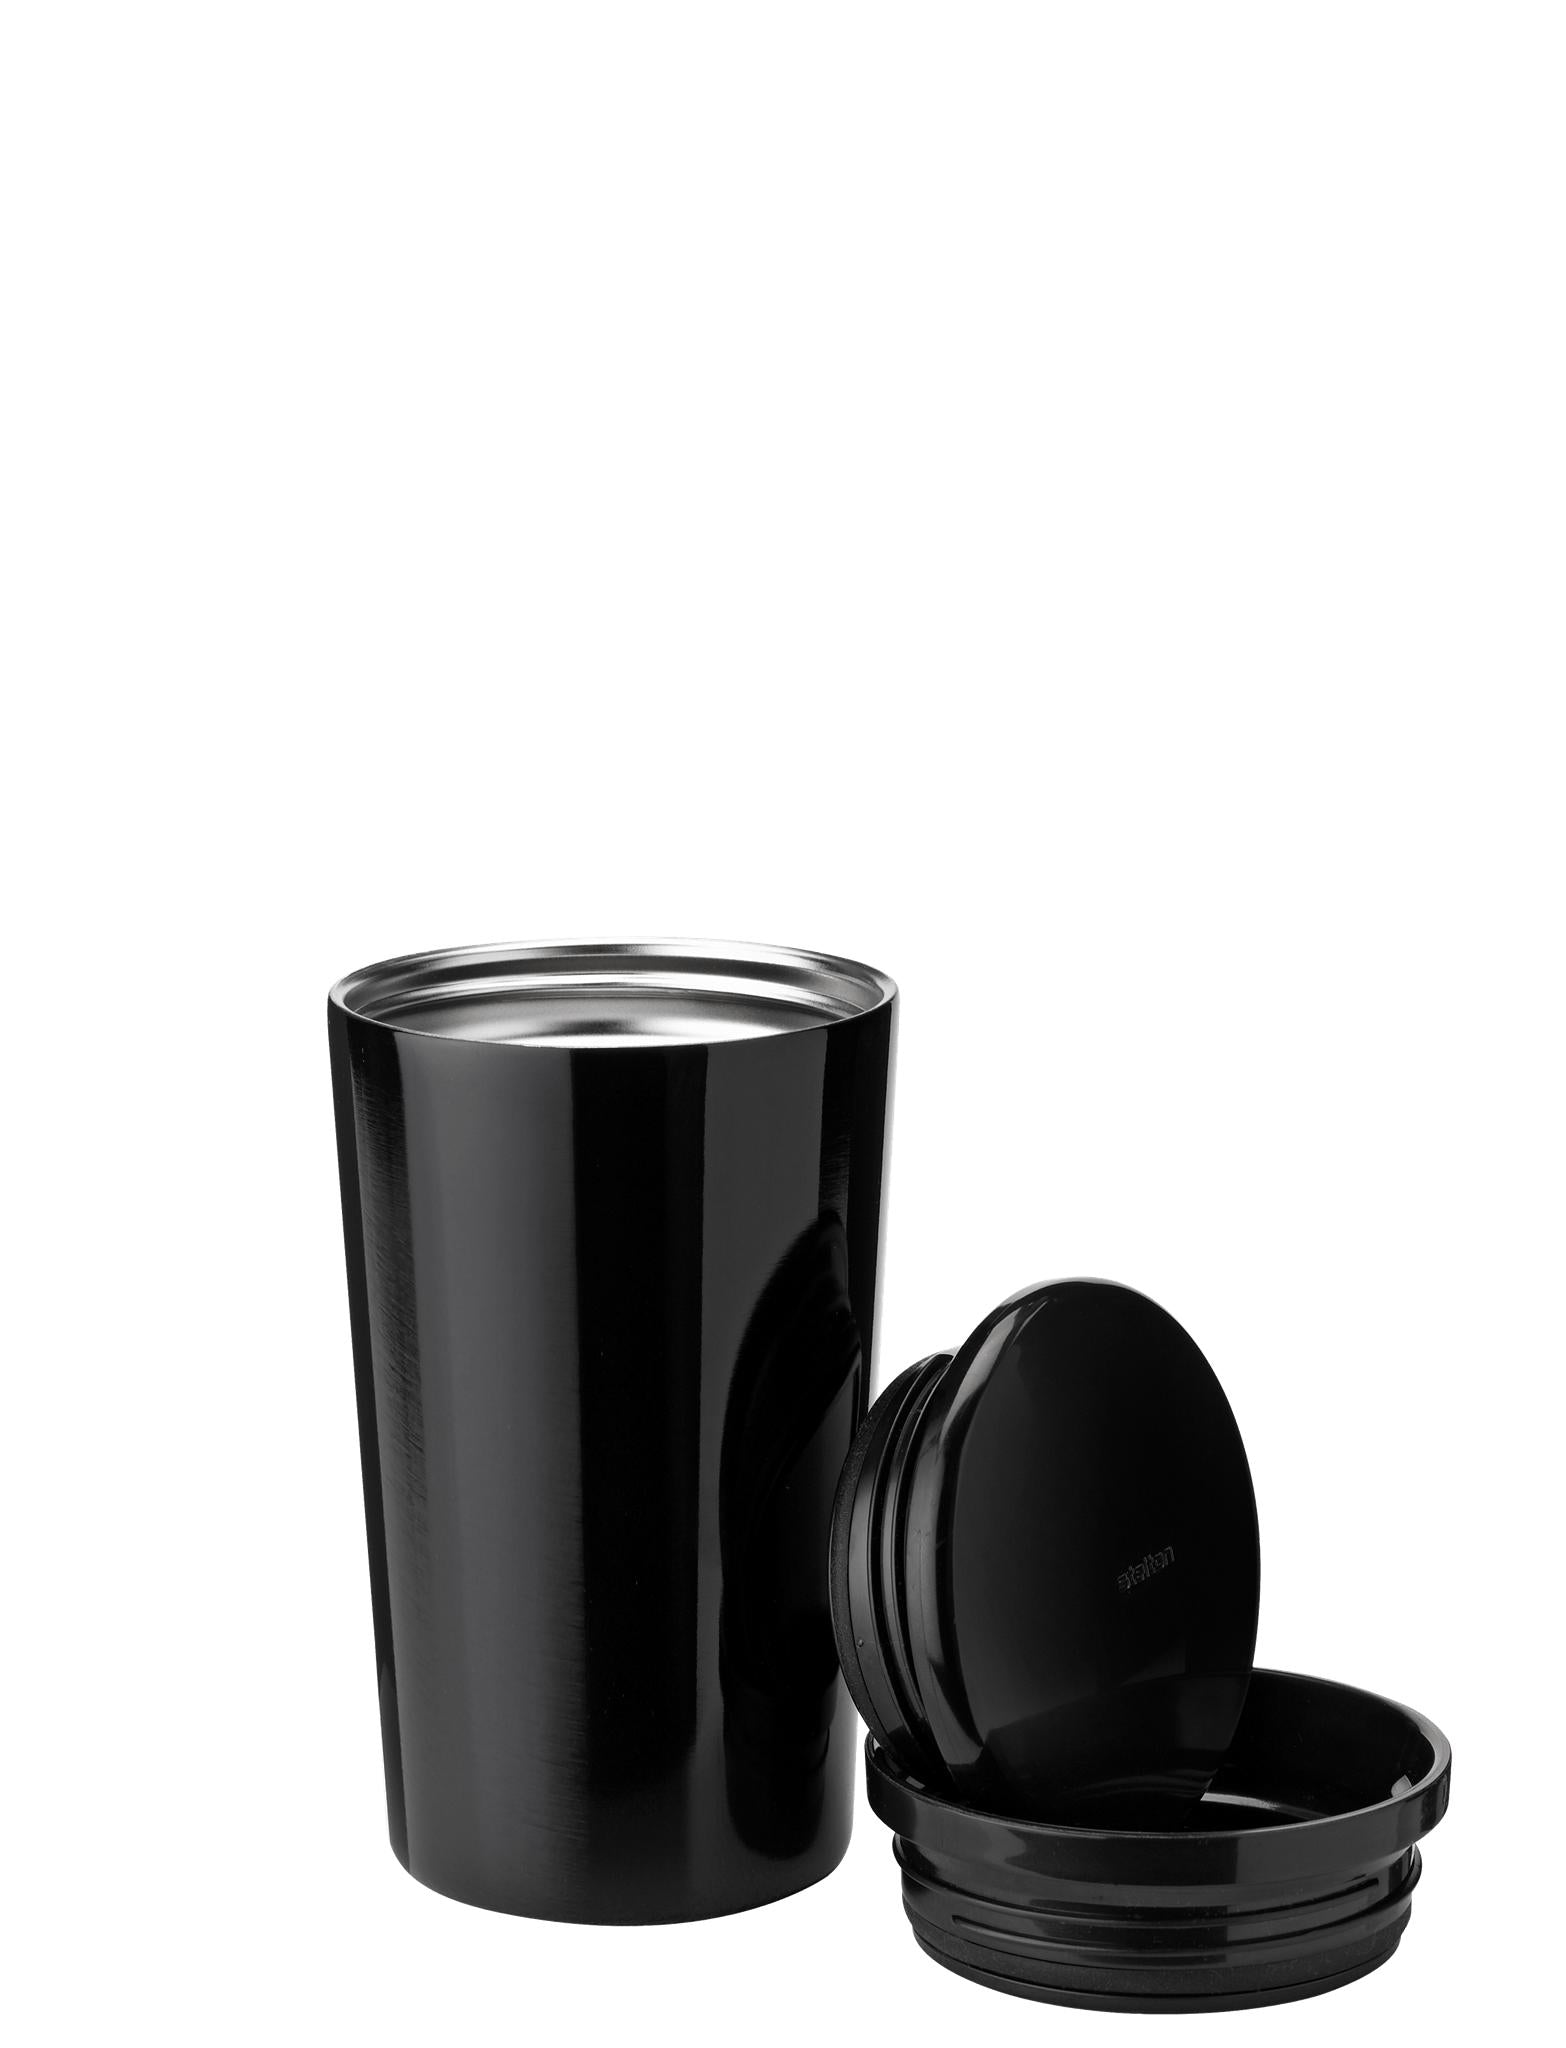 Stelton Carrie Thermo Taza 0,4 L, negro